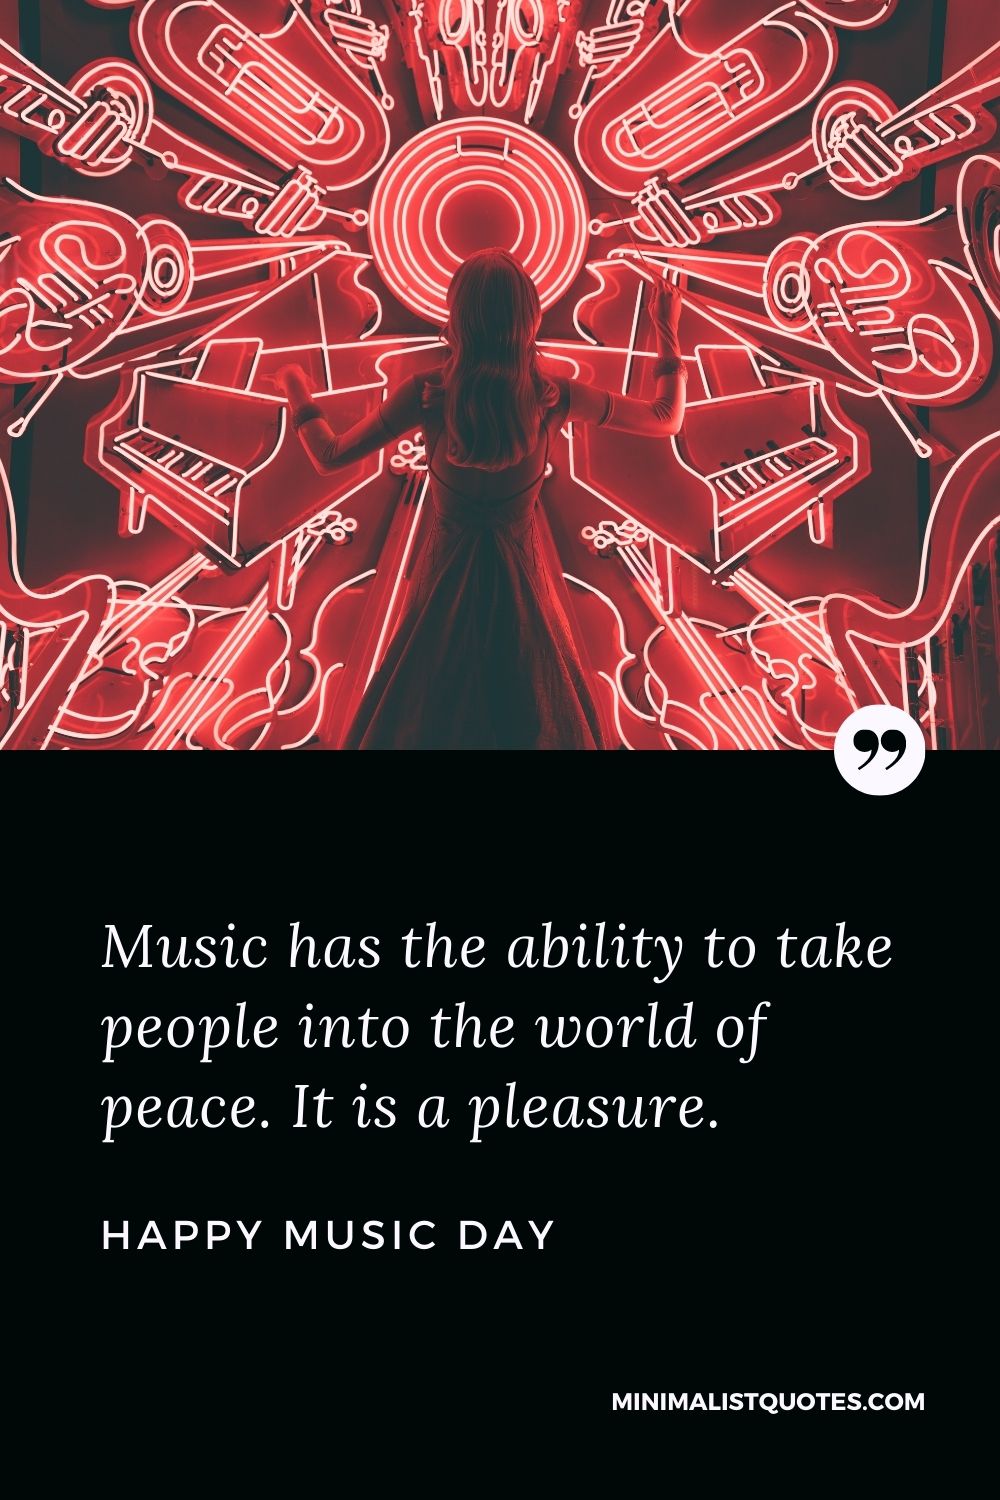 World music day wish, quote & HD Poster Image: Music has the ability to take people into the world of peace. It is a pleasure. Happy Music Day!